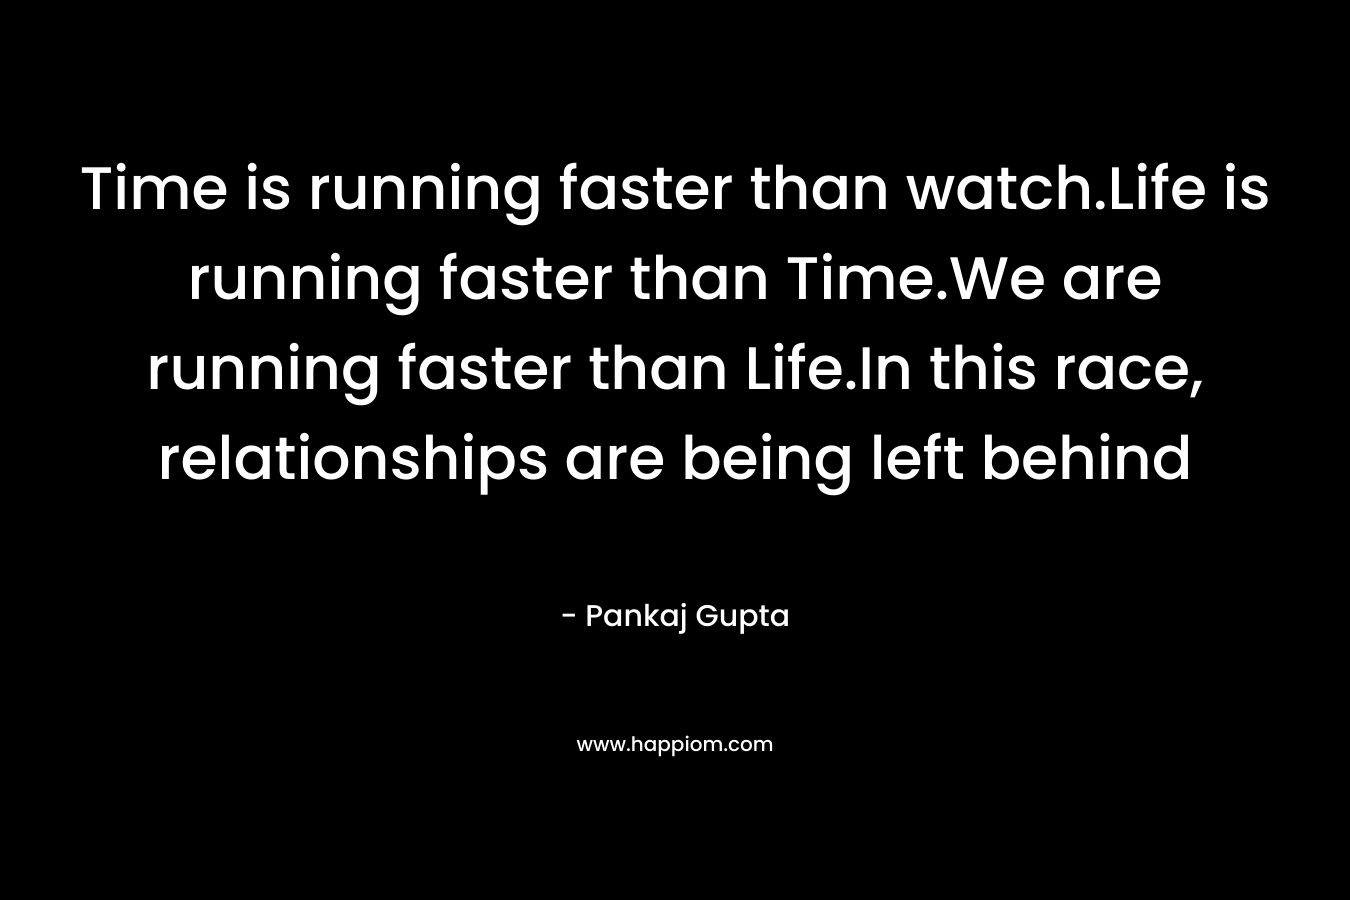 Time is running faster than watch.Life is running faster than Time.We are running faster than Life.In this race, relationships are being left behind